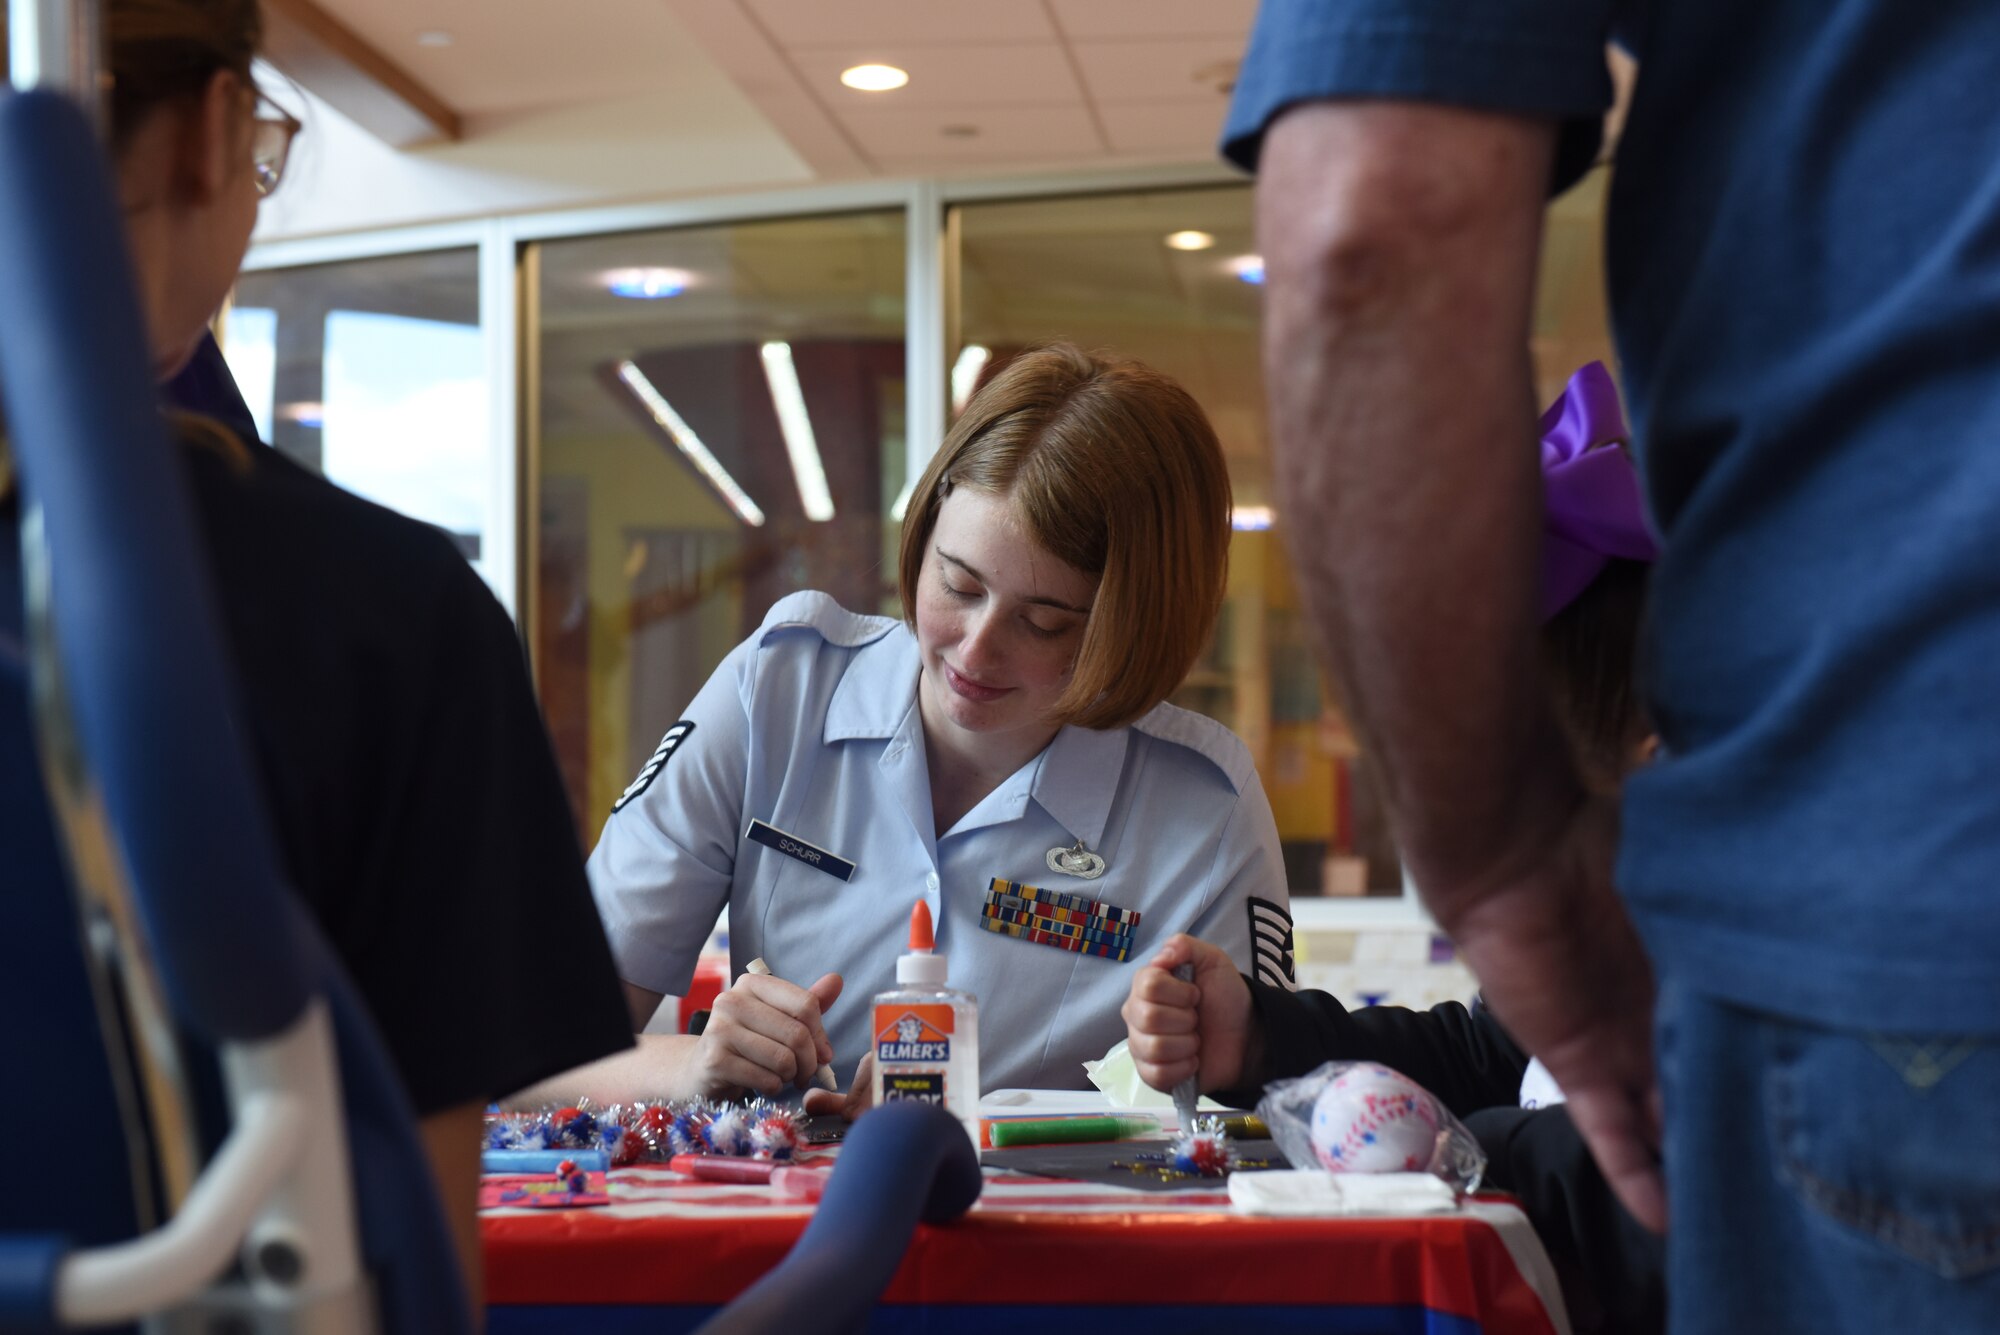 Tech. Sgt. Marjorie A. Schurr, NCO in charge of community engagement with the 911th Airlift Wing, makes glitter glue fireworks with patients and their families at Children’s Hospital of Pittsburgh, June 14, 2019.